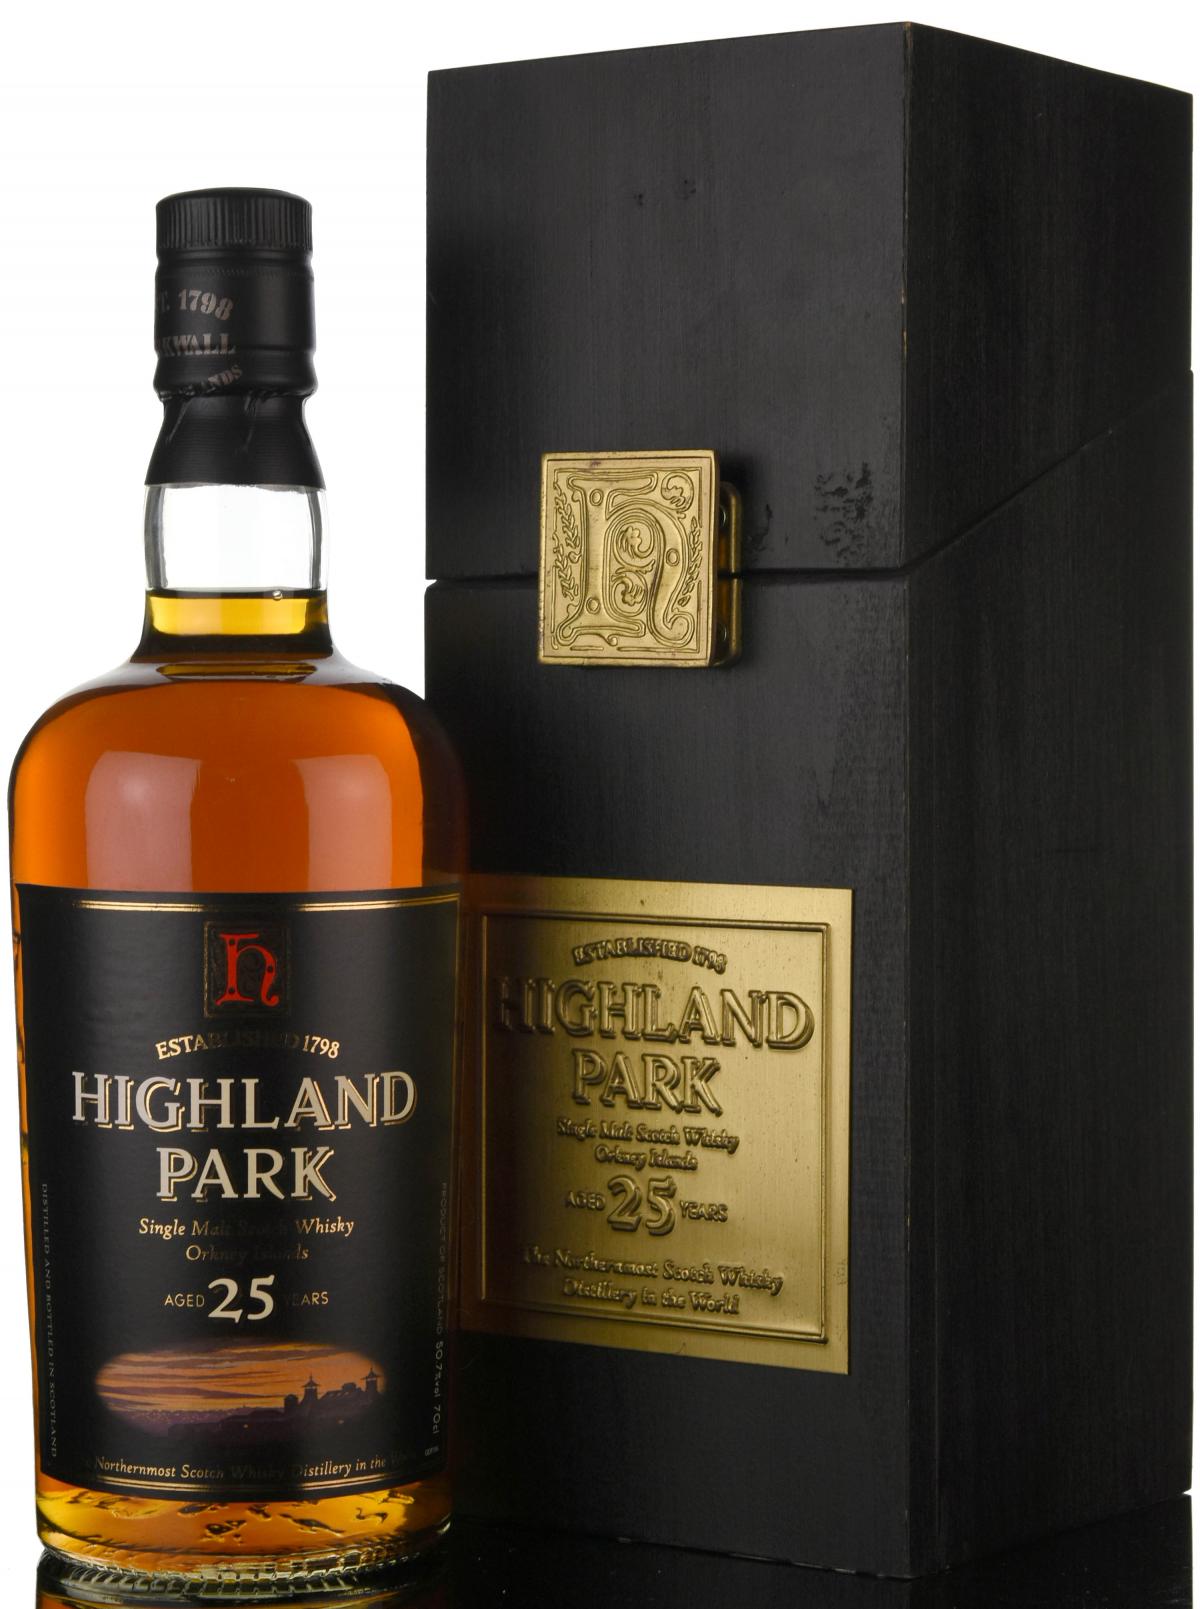 Highland Park 25 Year Old - Early 2000s - 50.7%